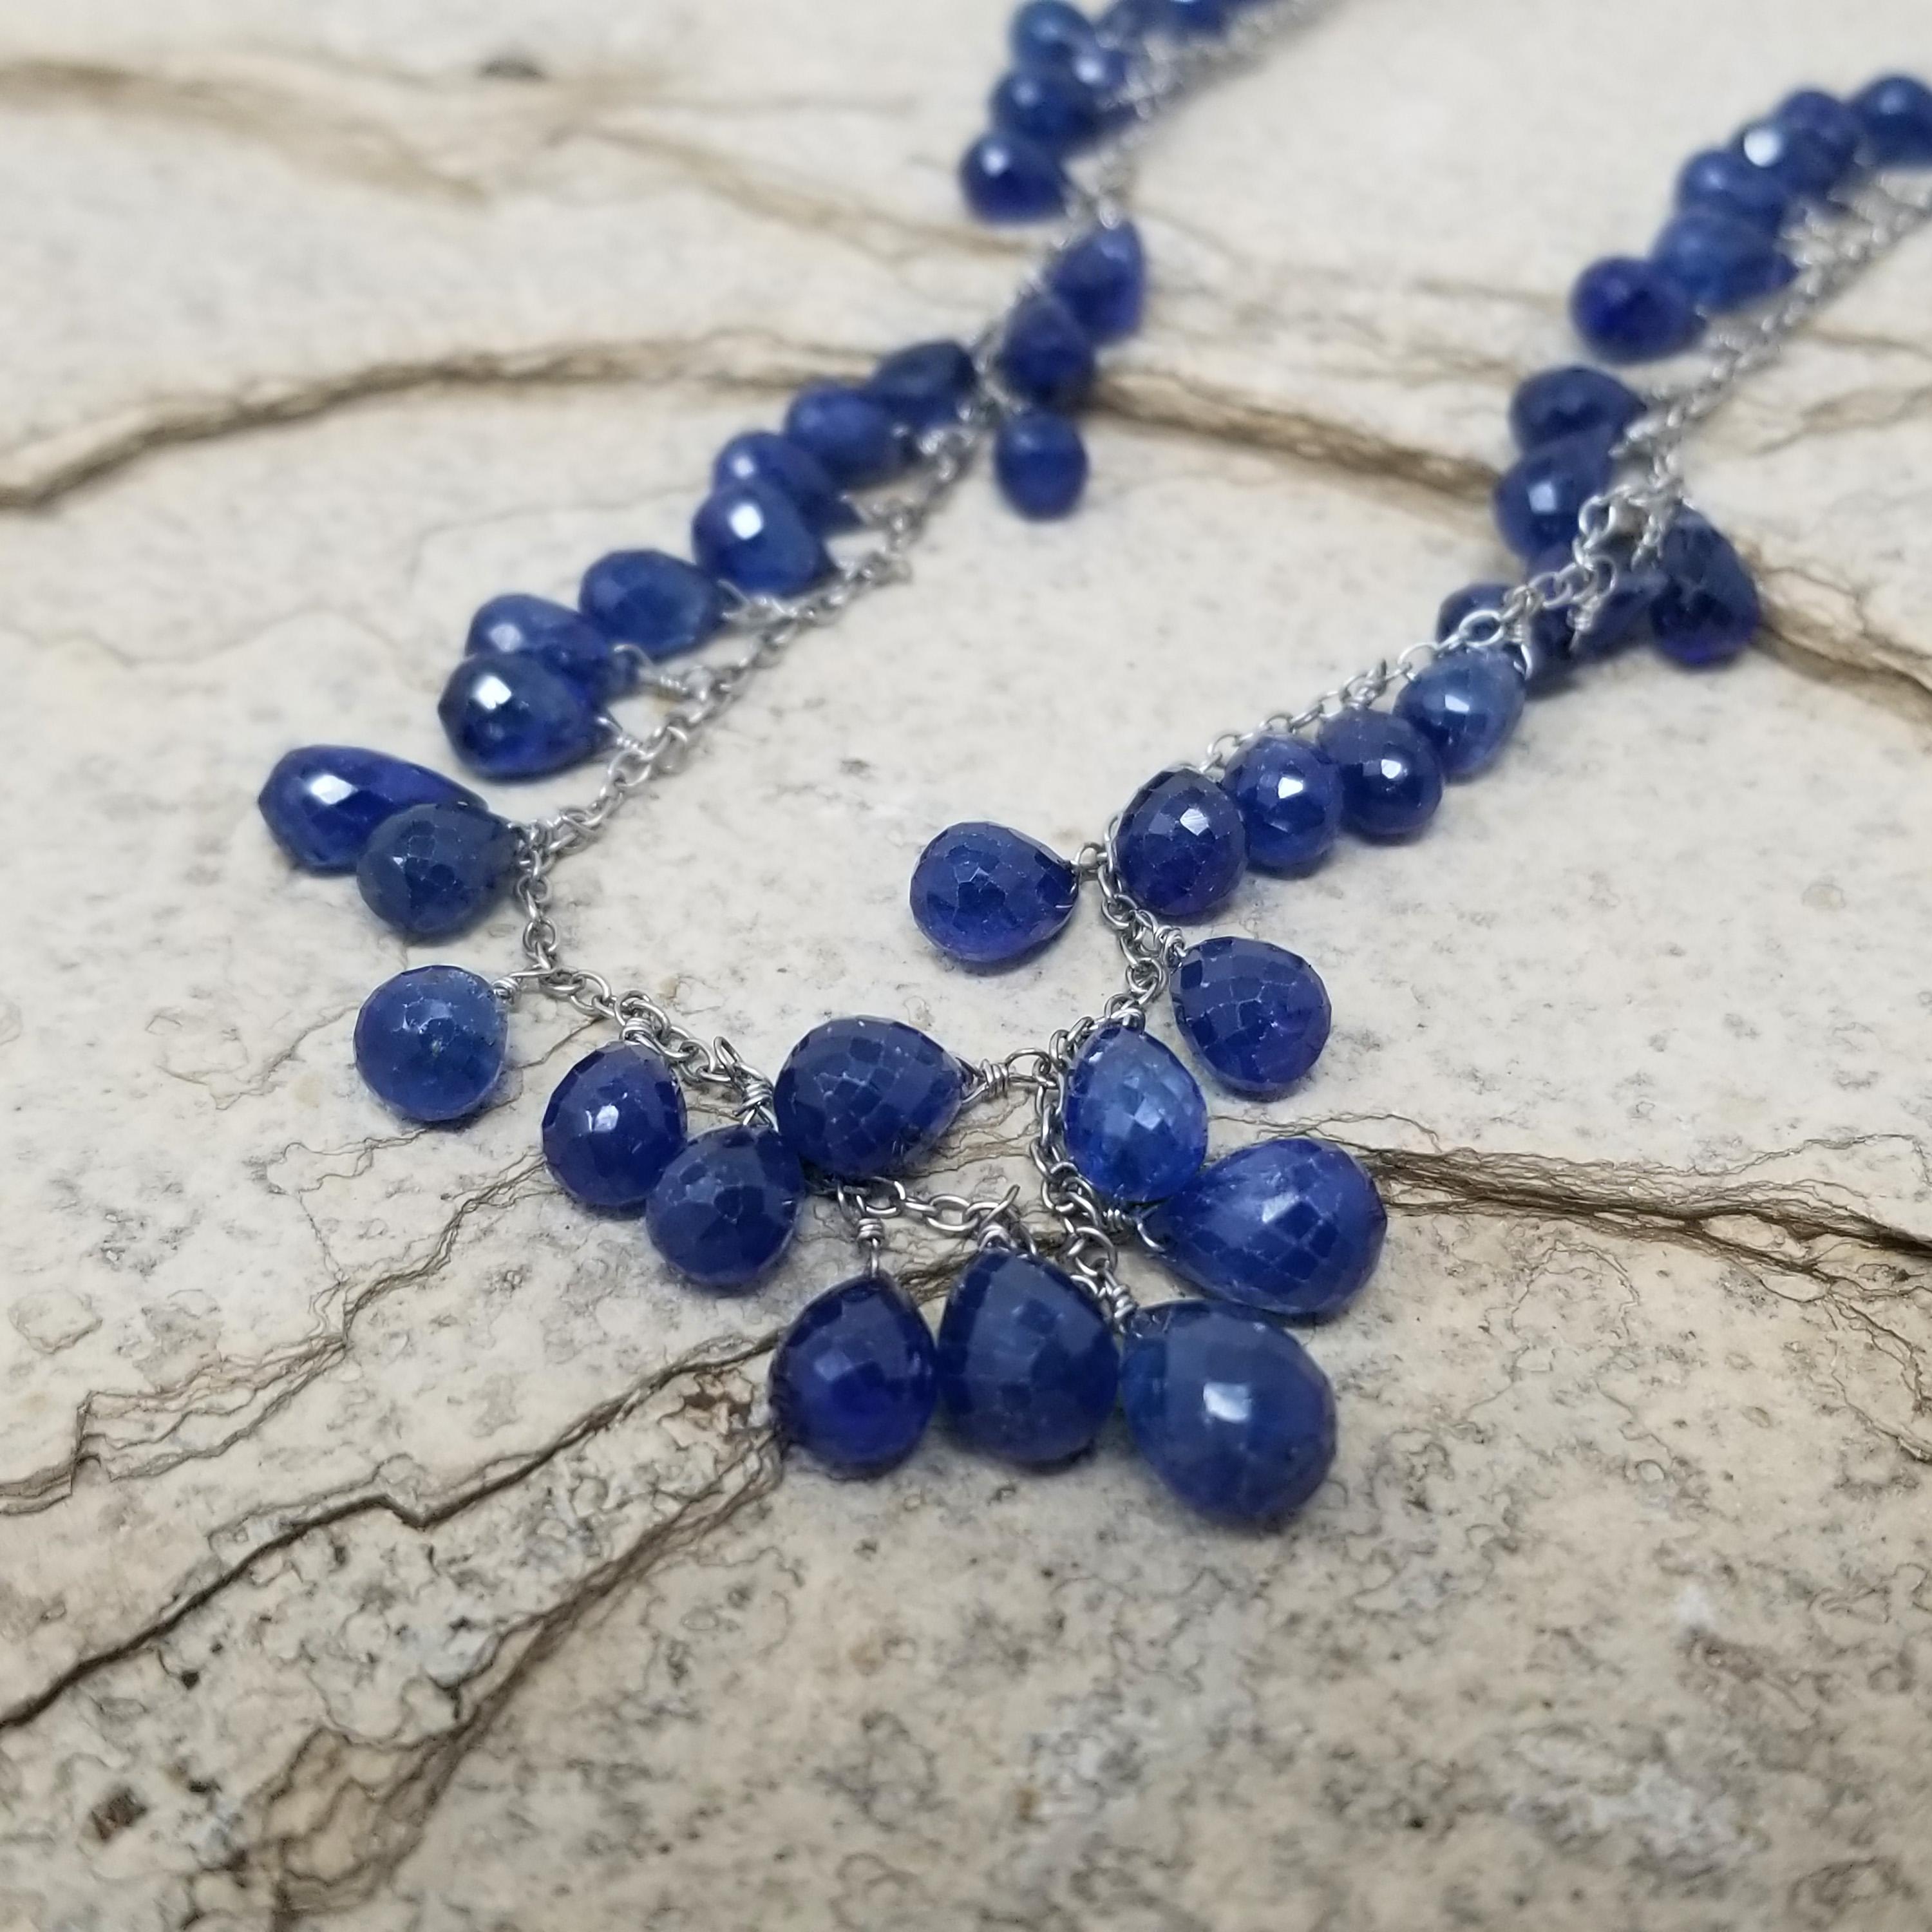 A waterfall of true-blue, briolette-cut sapphires in graduating sizes cascade from this sophisticated fringe necklace. Equal parts casual elegance and bohemian flippancy, this necklace is incredibly fun to wear.

-18kt Gold
-17.25